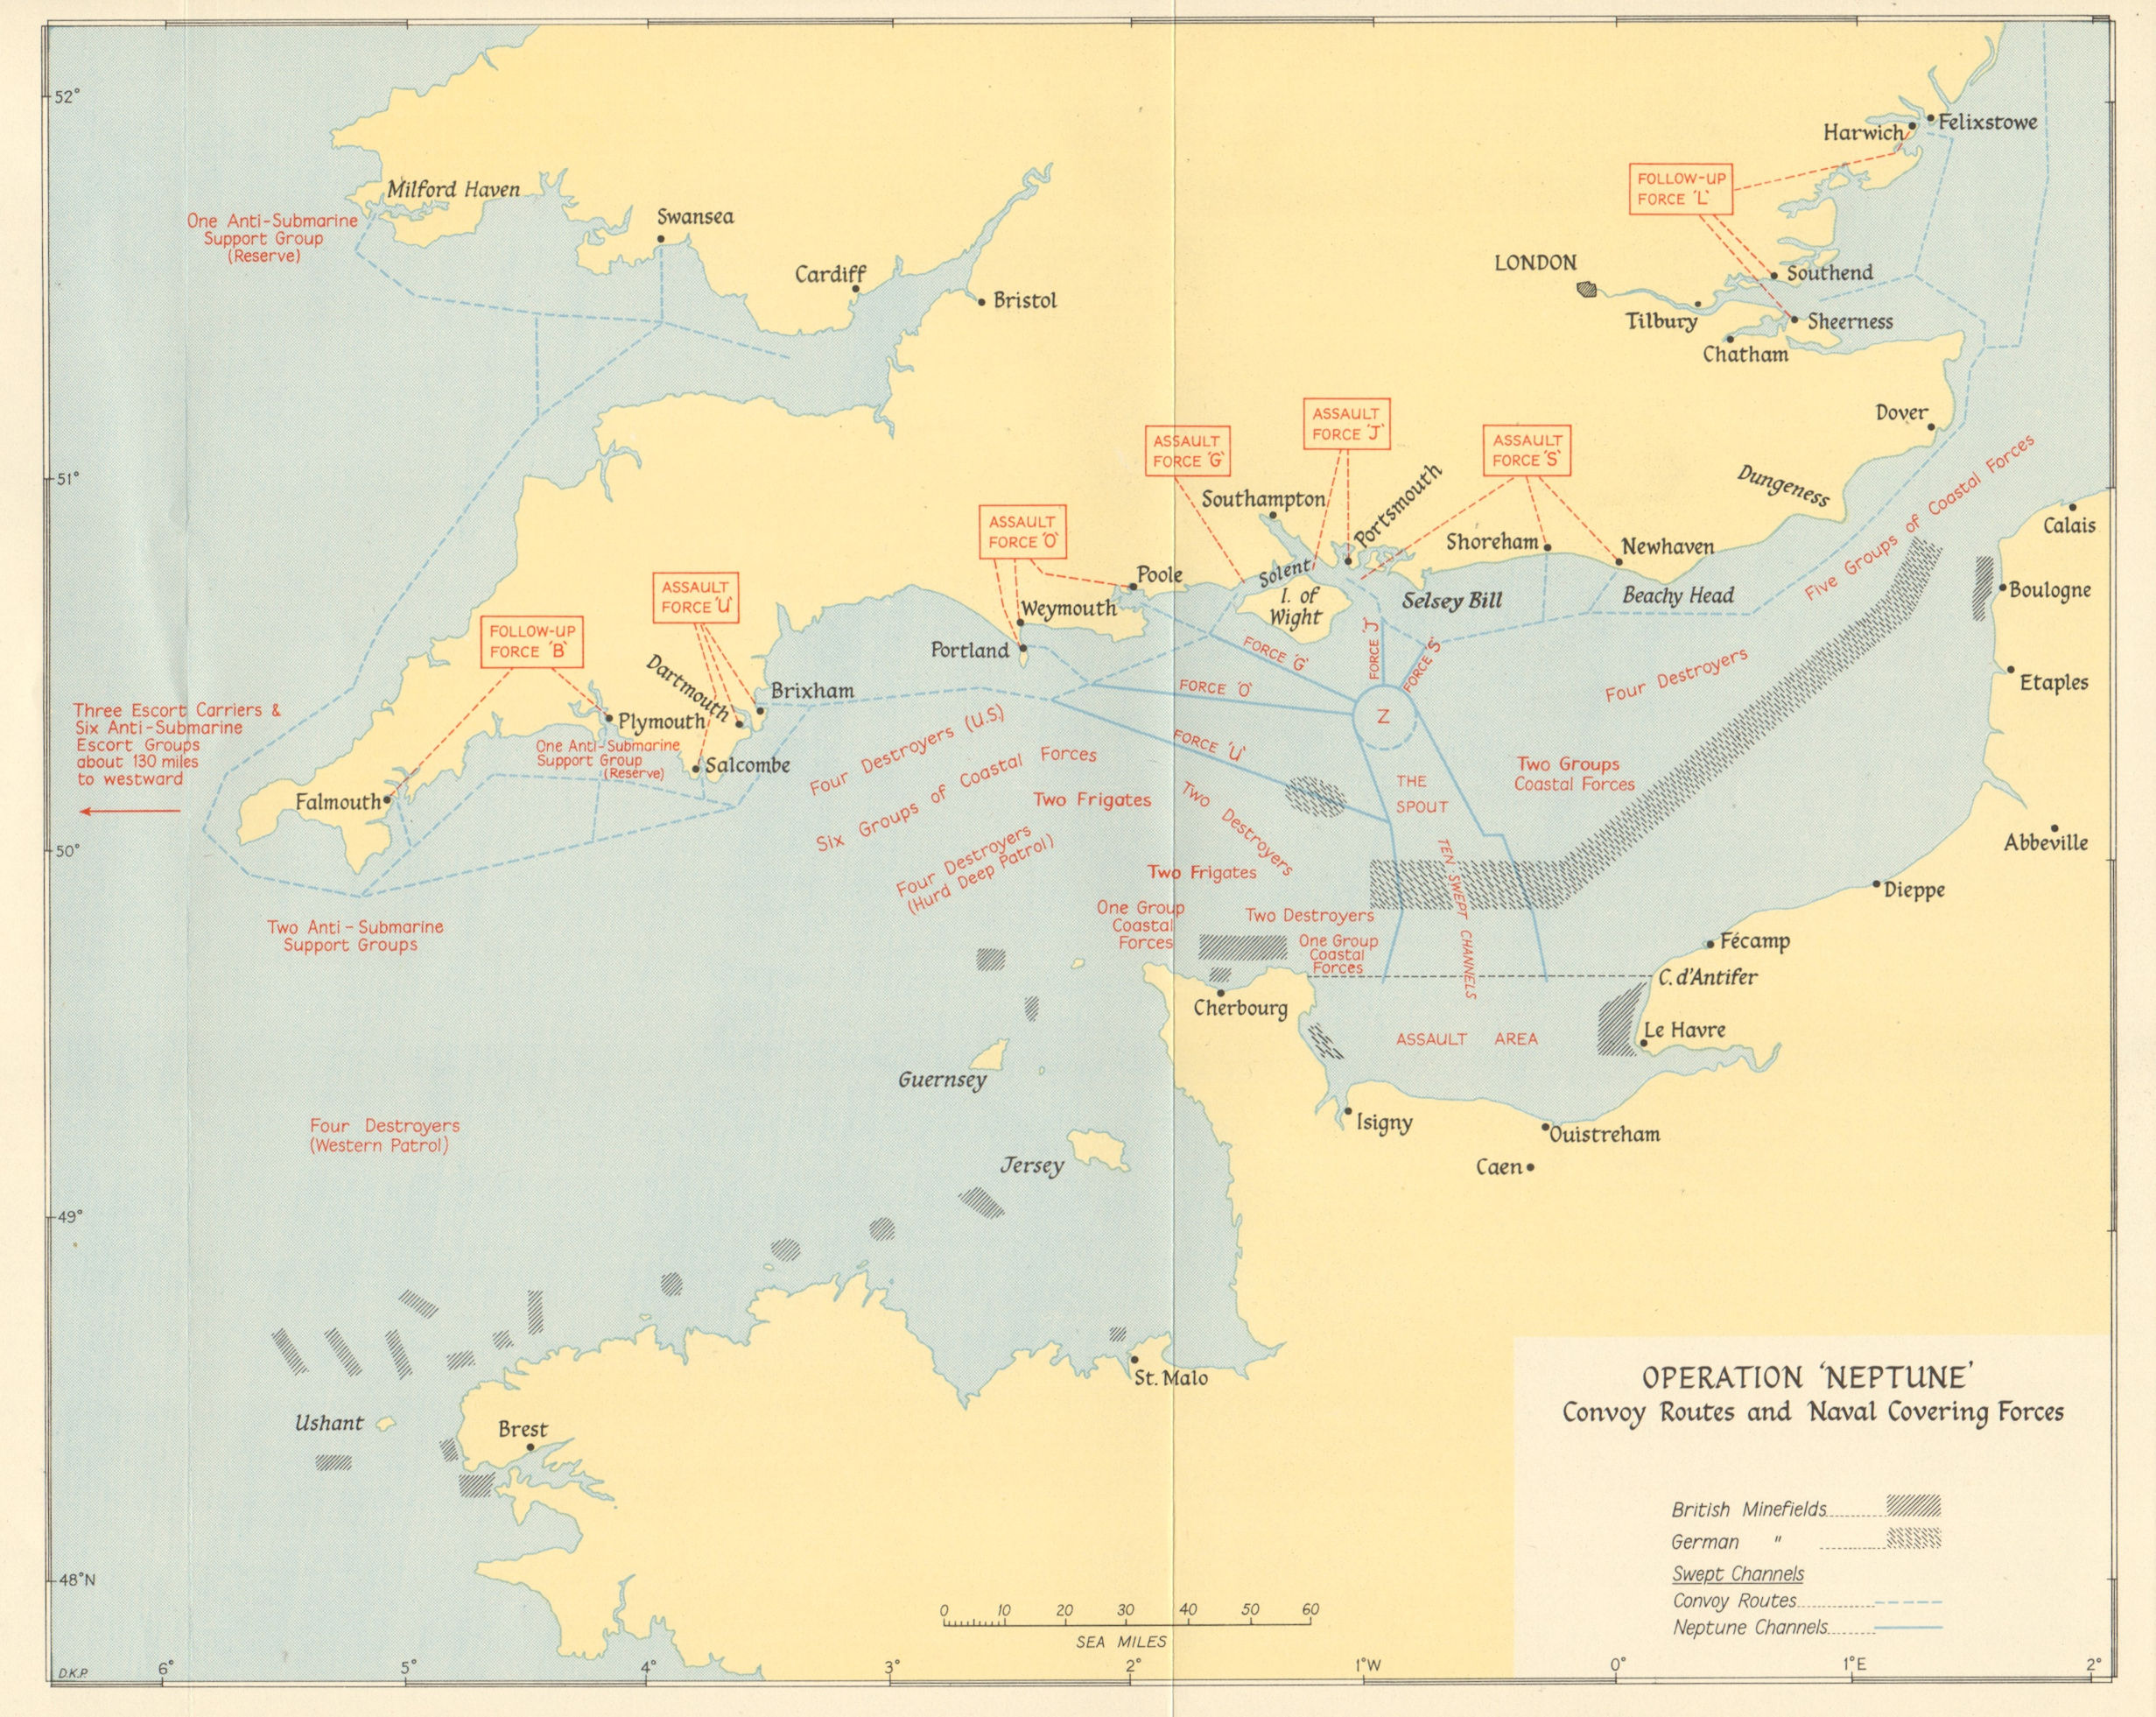 D-Day Operation Neptune June 1944. Convoy routes. Naval covering forces 1962 map